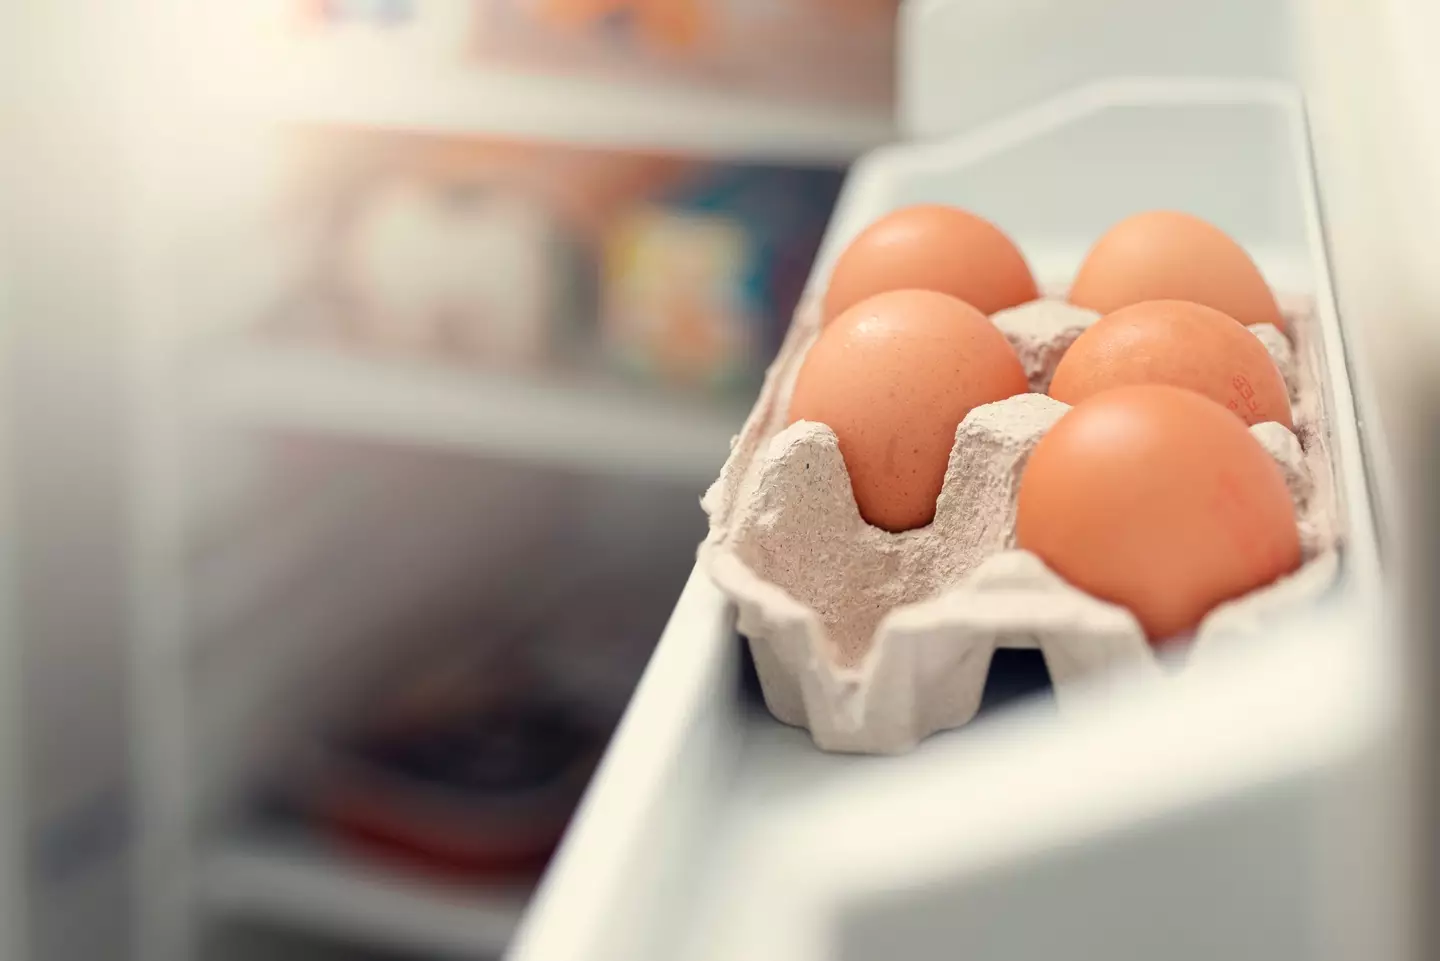 It is estimated that we consume 202 eggs per person per year